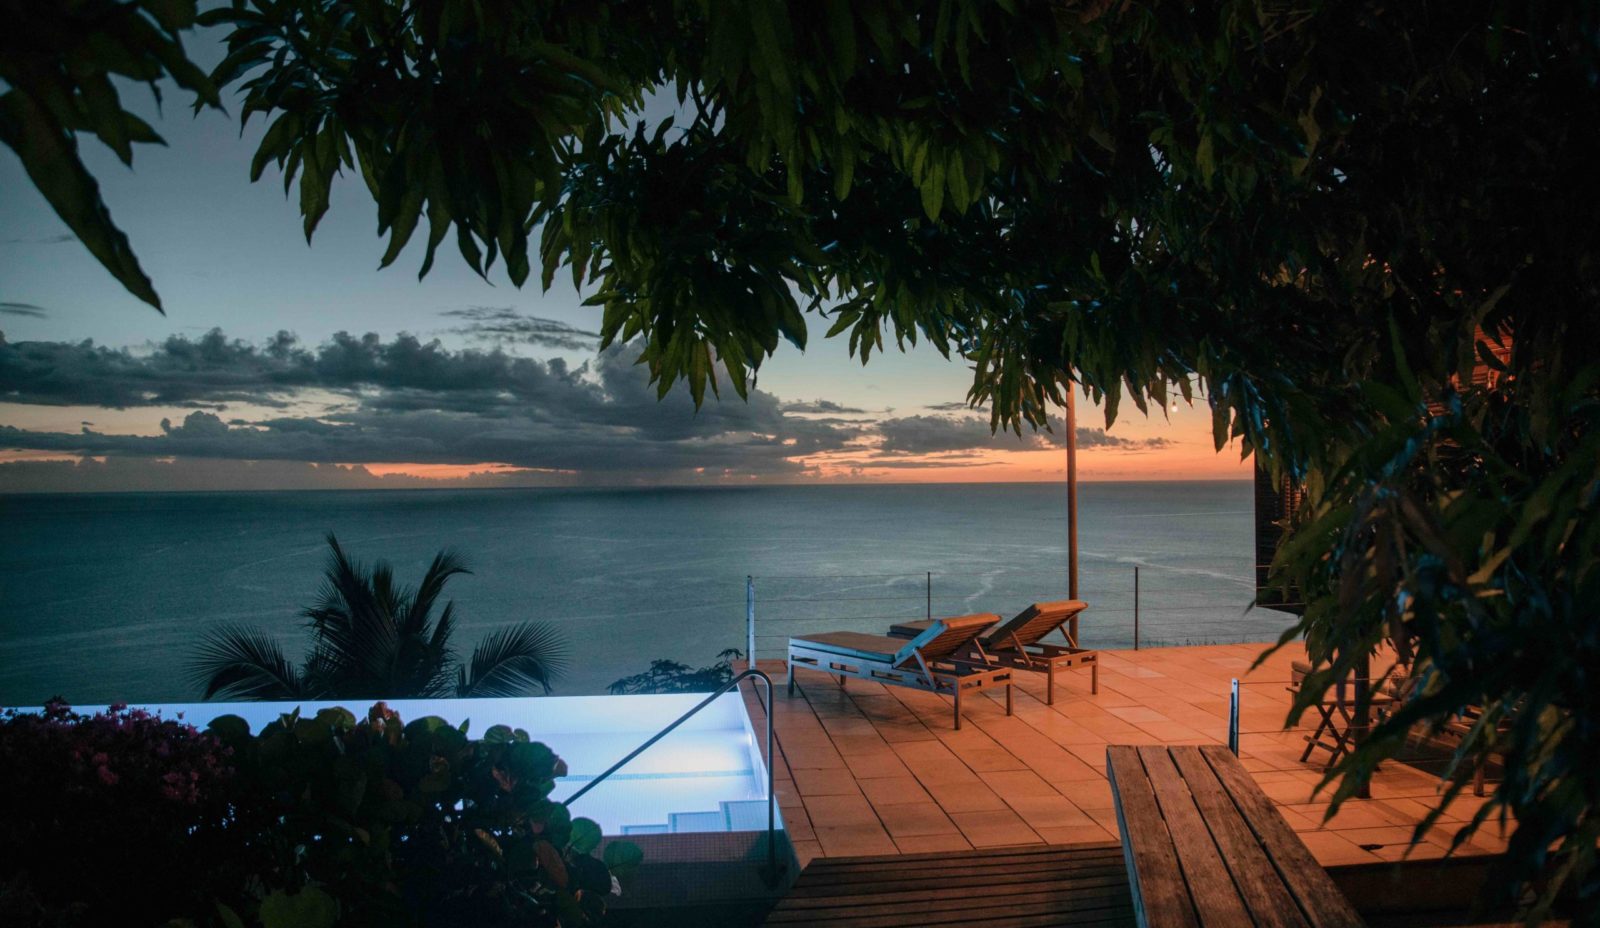 Dusk on the sunterrace at Cosmos St Lucia, featuring the pool and sun loungers framed by foliage in the foreground, with sunset over the Caribbean Sea in the background